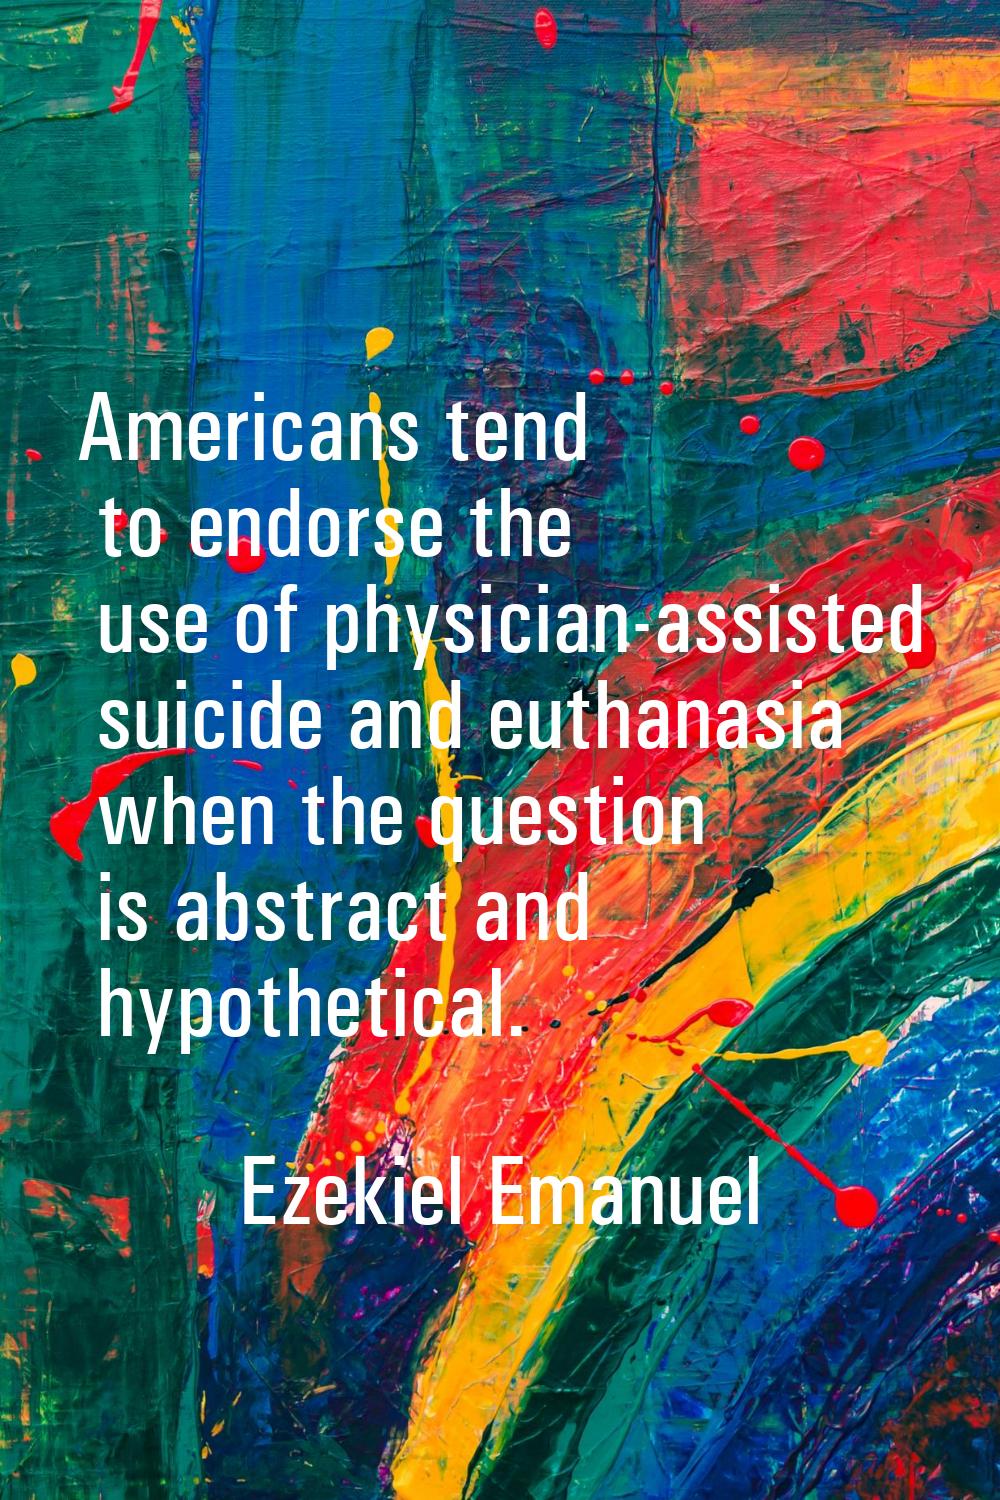 Americans tend to endorse the use of physician-assisted suicide and euthanasia when the question is